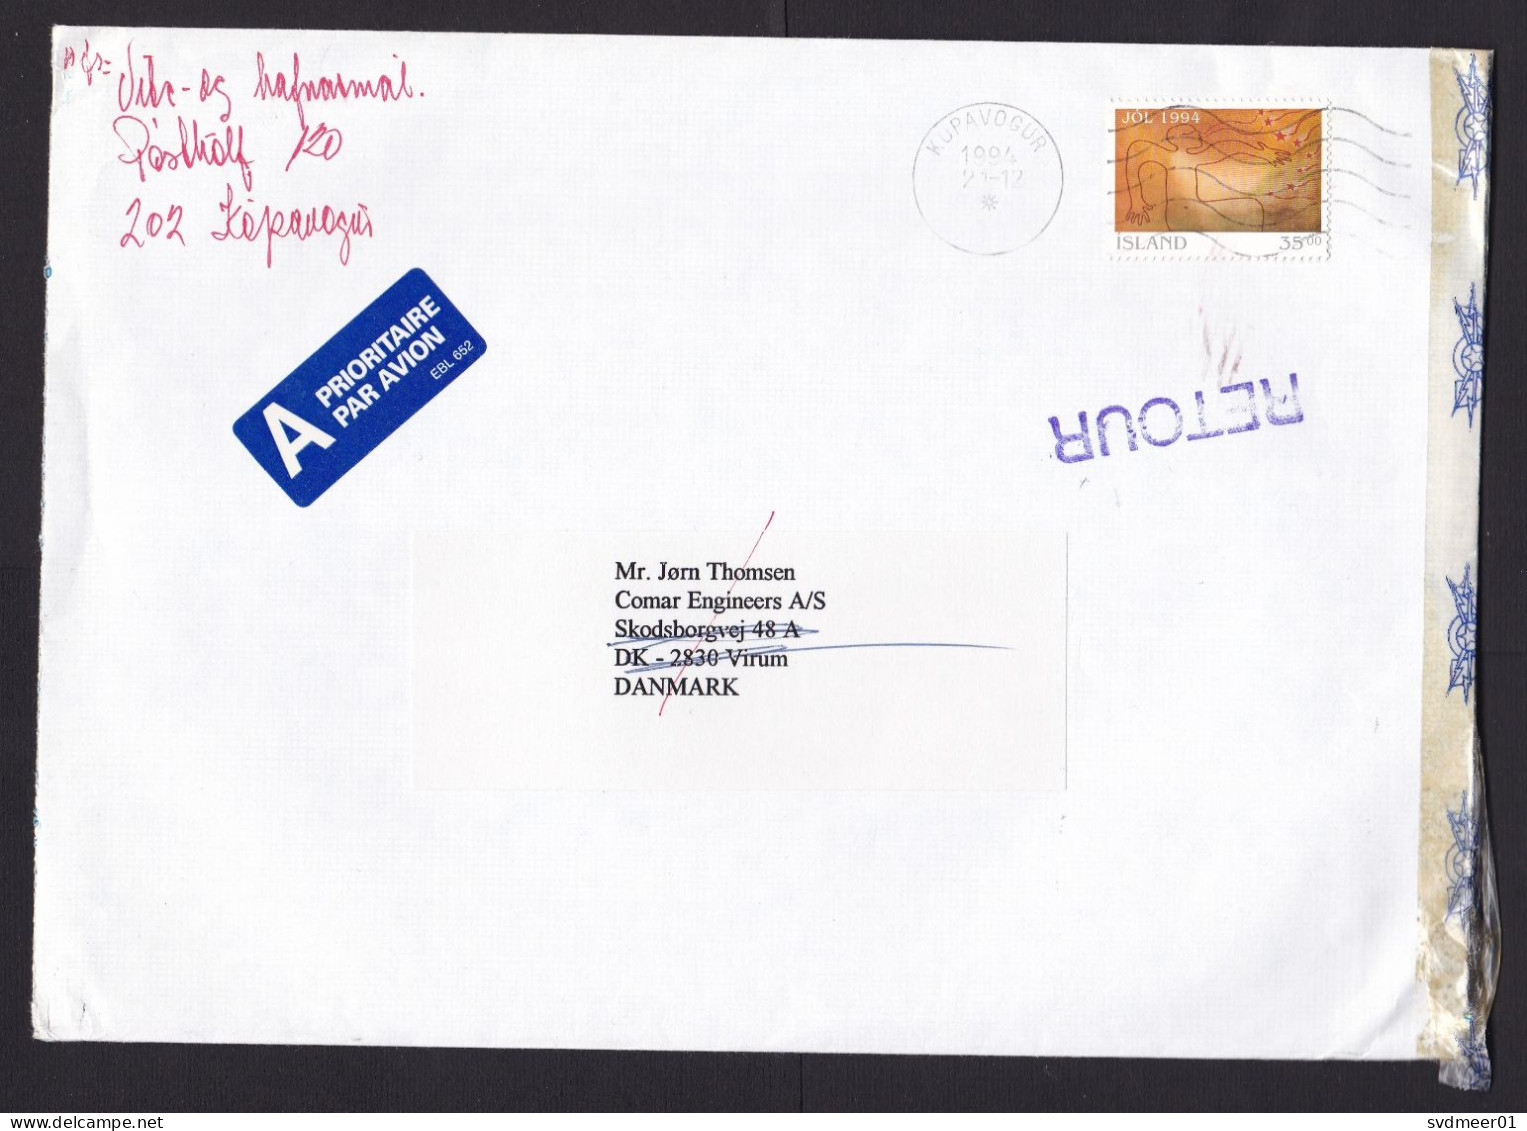 Iceland: Airmail Cover To Denmark, 1994, 1 Stamp, Returned, Retour Label, Postal Tape, Opened For Address (minor Damage) - Lettres & Documents